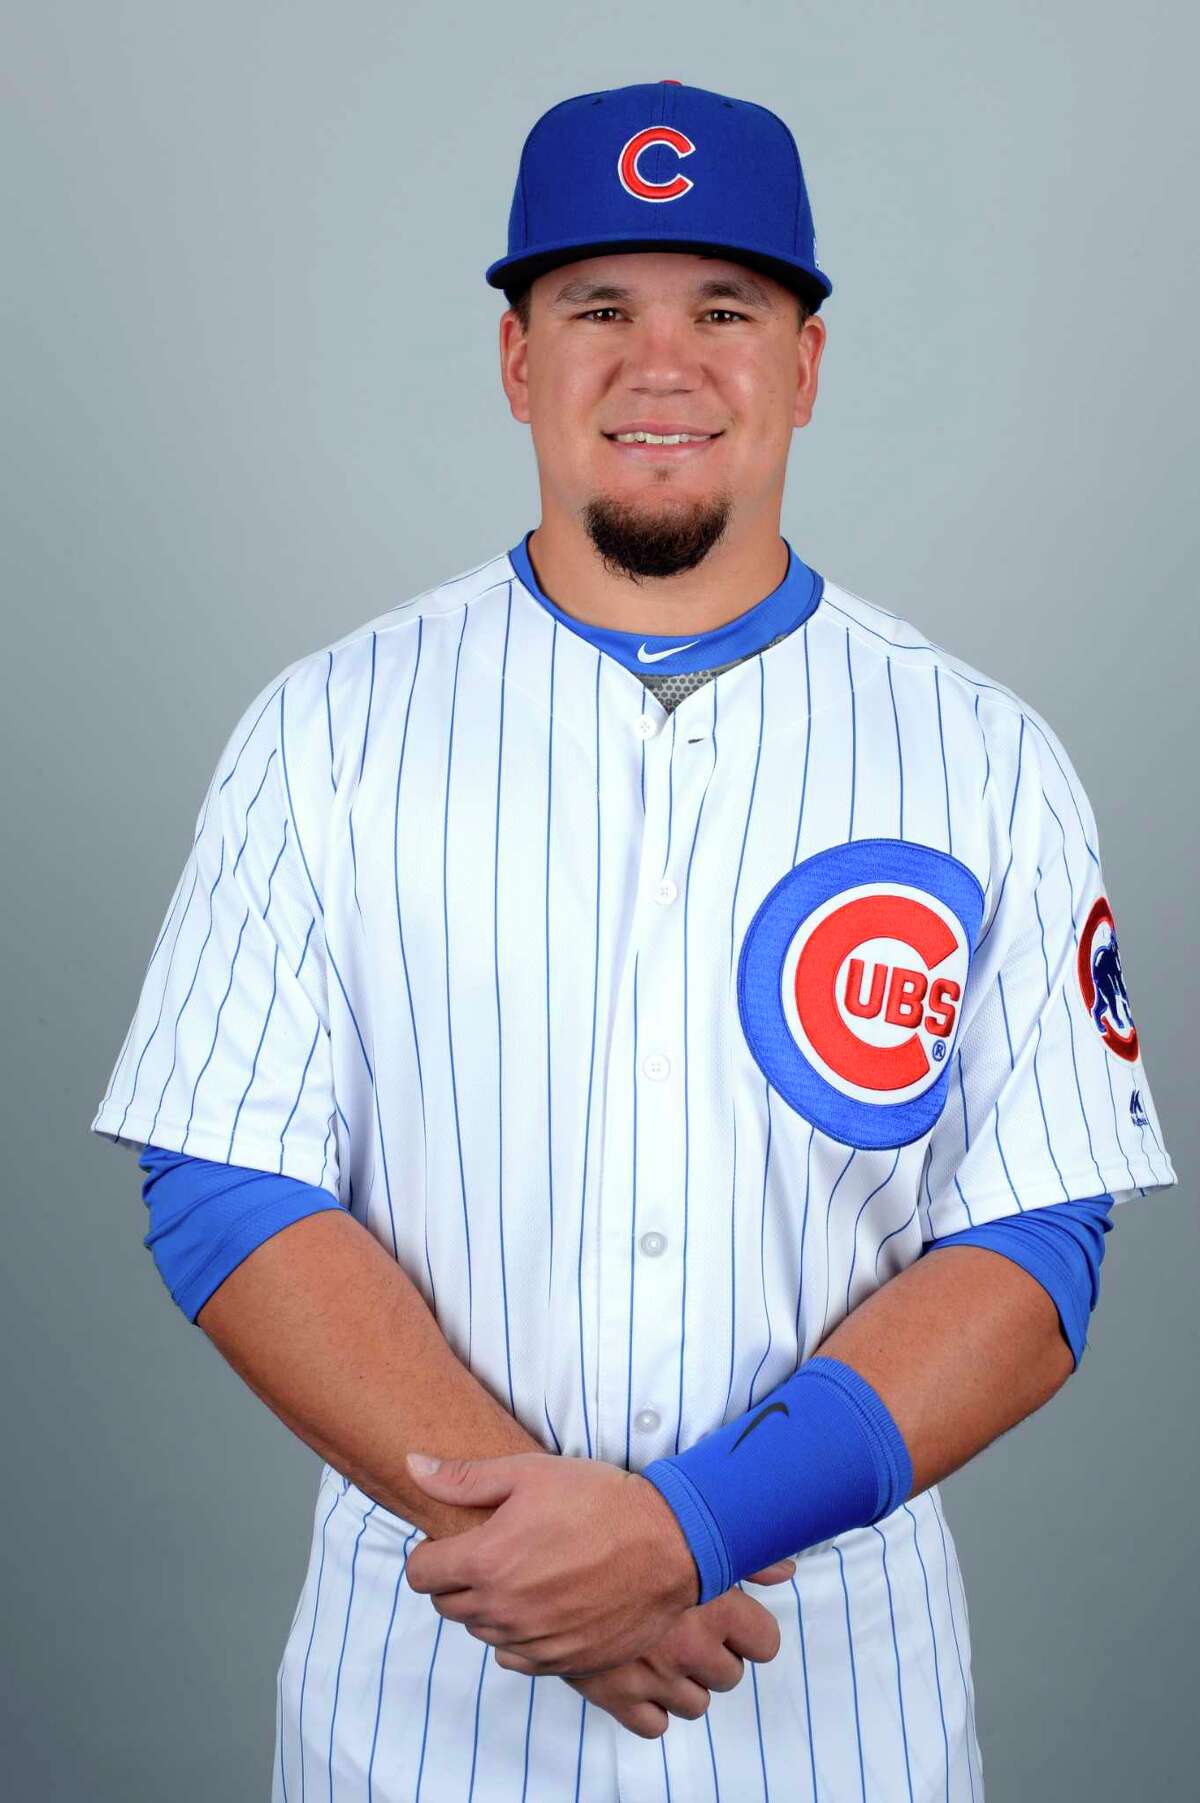 MESA, AZ - FEBRUARY 21: Kyle Schwarber #12 of the Chicago Cubs poses during Photo Day on Tuesday, February 21, 2017 at Sloan Park in Mesa, Arizona. (Photo by Ron Vesely/MLB Photos via Getty Images) *** Local Caption *** Kyle Schwarber